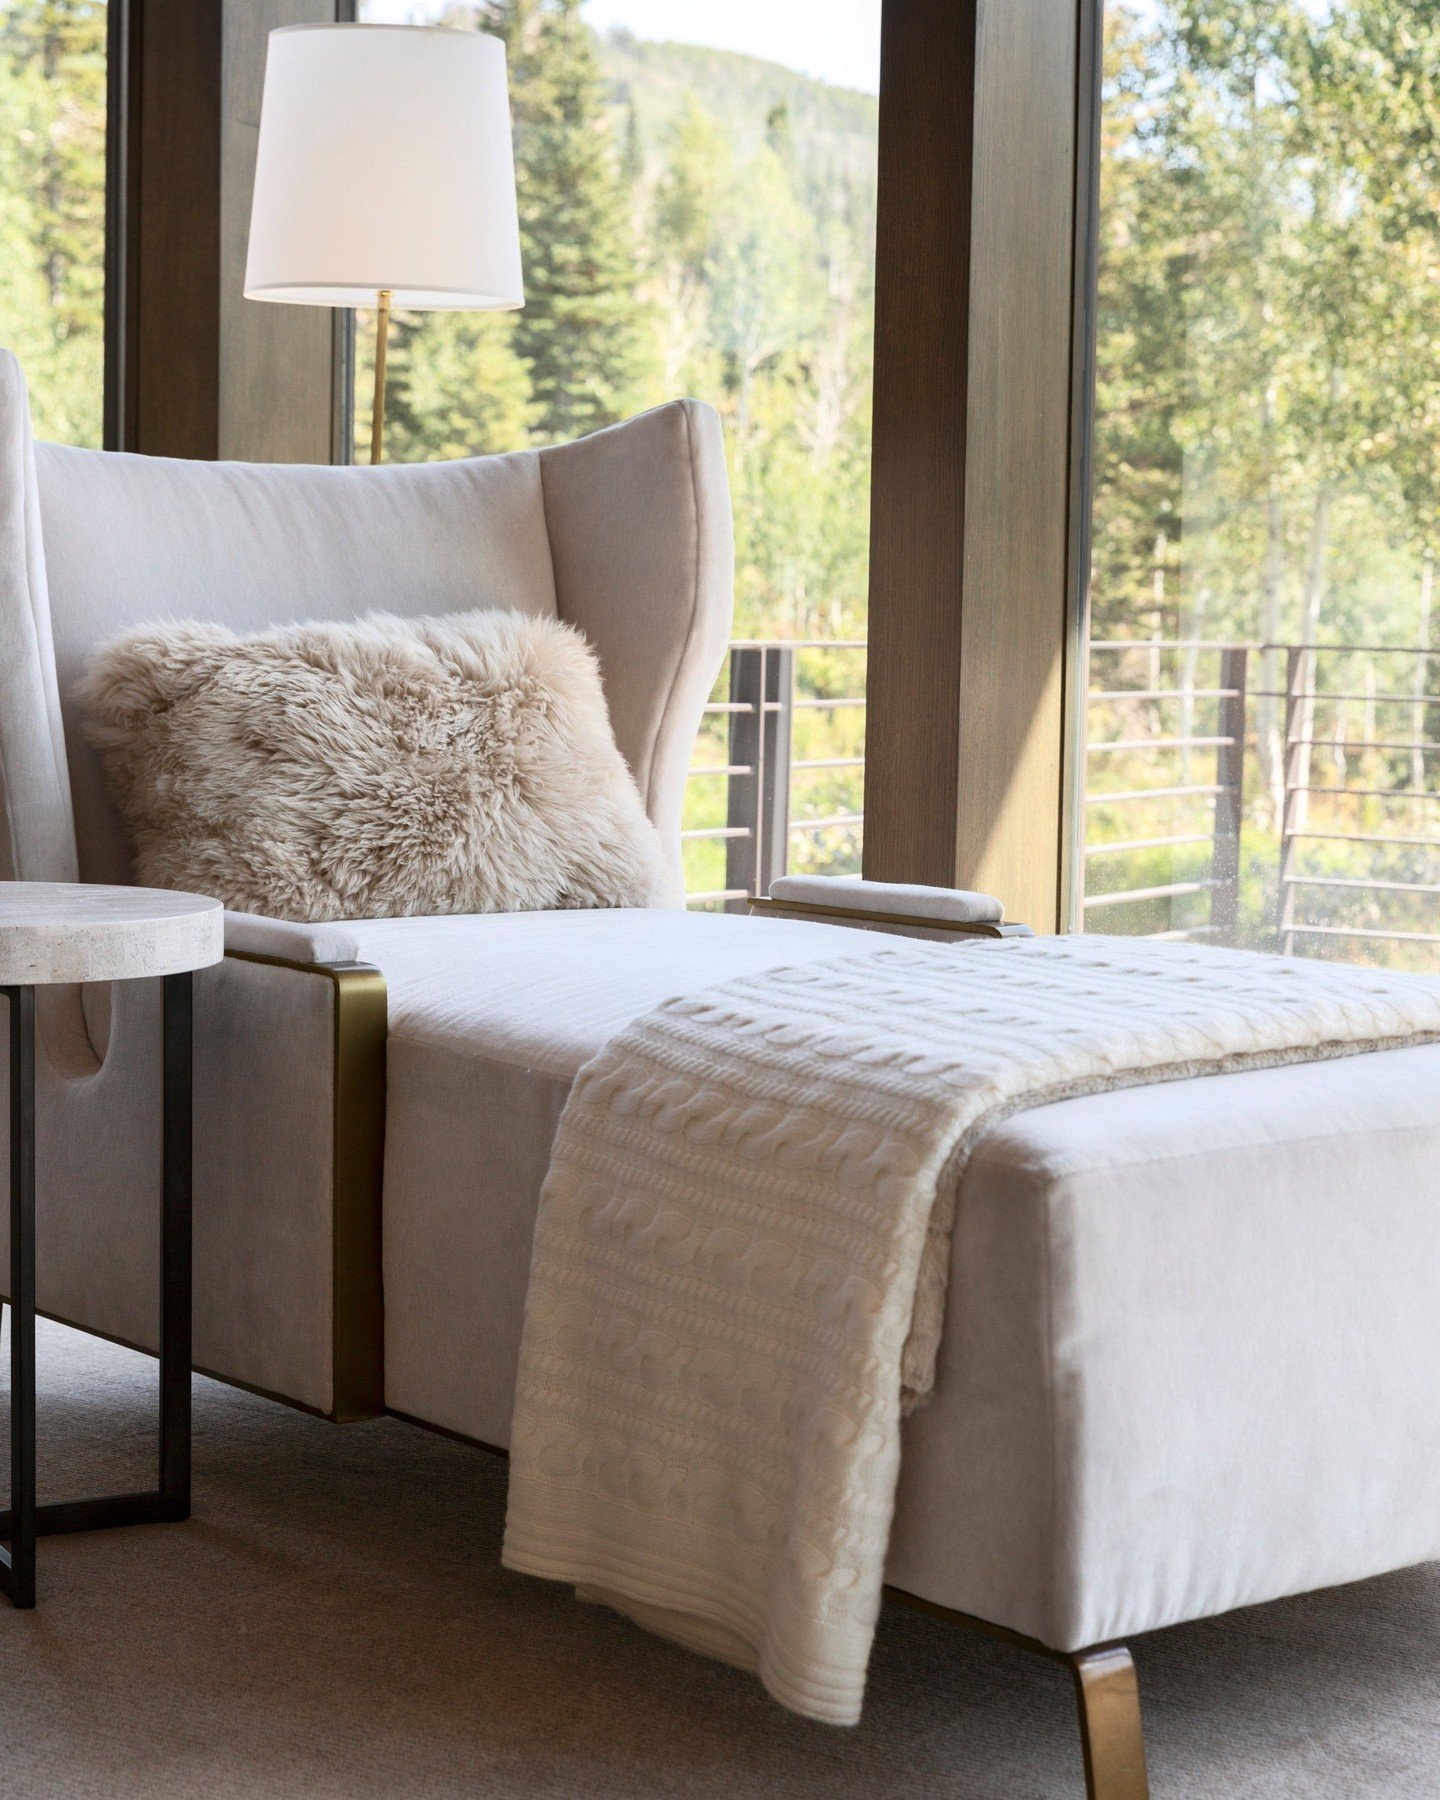 How perfect is this vignette? Carefully situated in a corner of a Master Bedroom suite, it's the perfect spot to hunker down with  a great book or just stare off into the view of the rolling mountainside. We love the small moments in houses, they are